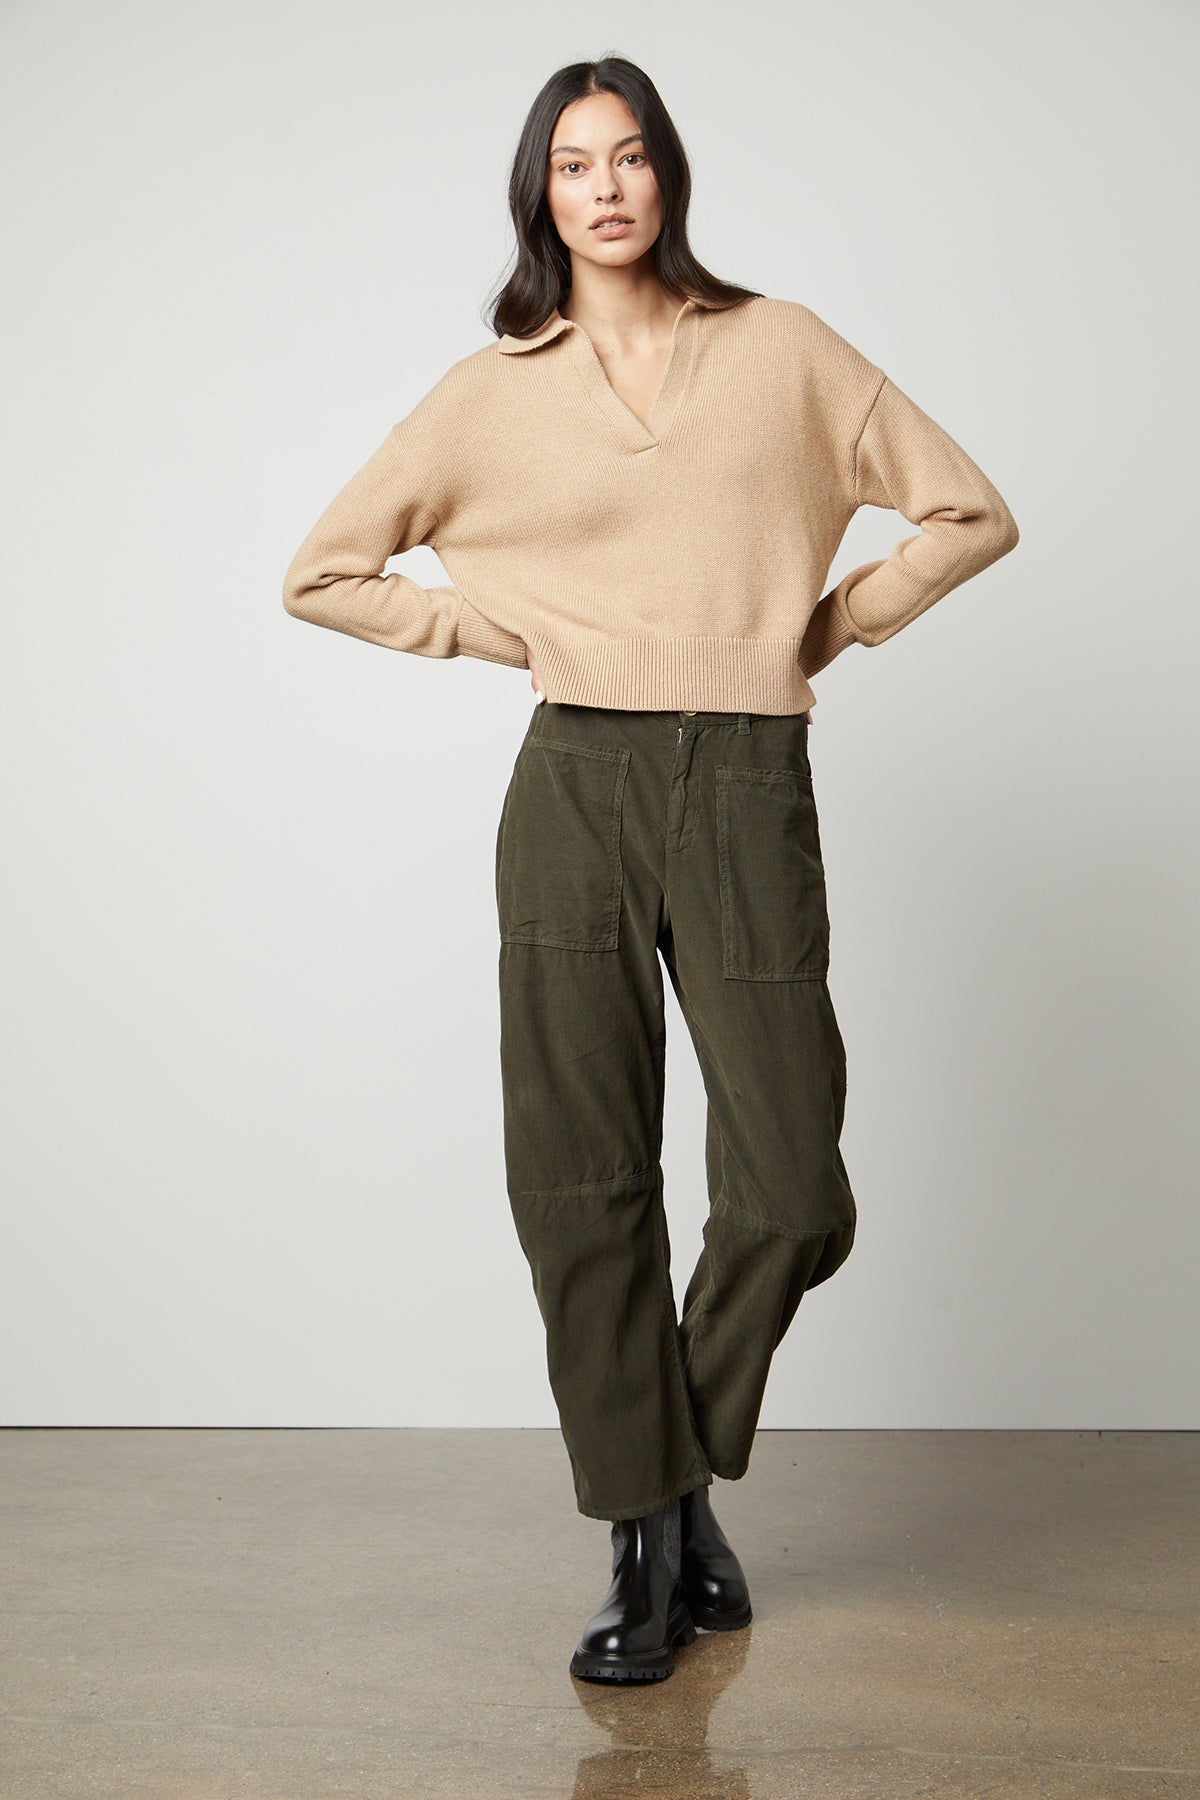 The model is wearing a Velvet by Graham & Spencer LUCIE POLO SWEATER with a ribbed V-neckline and olive cargo pants.-35503528181953